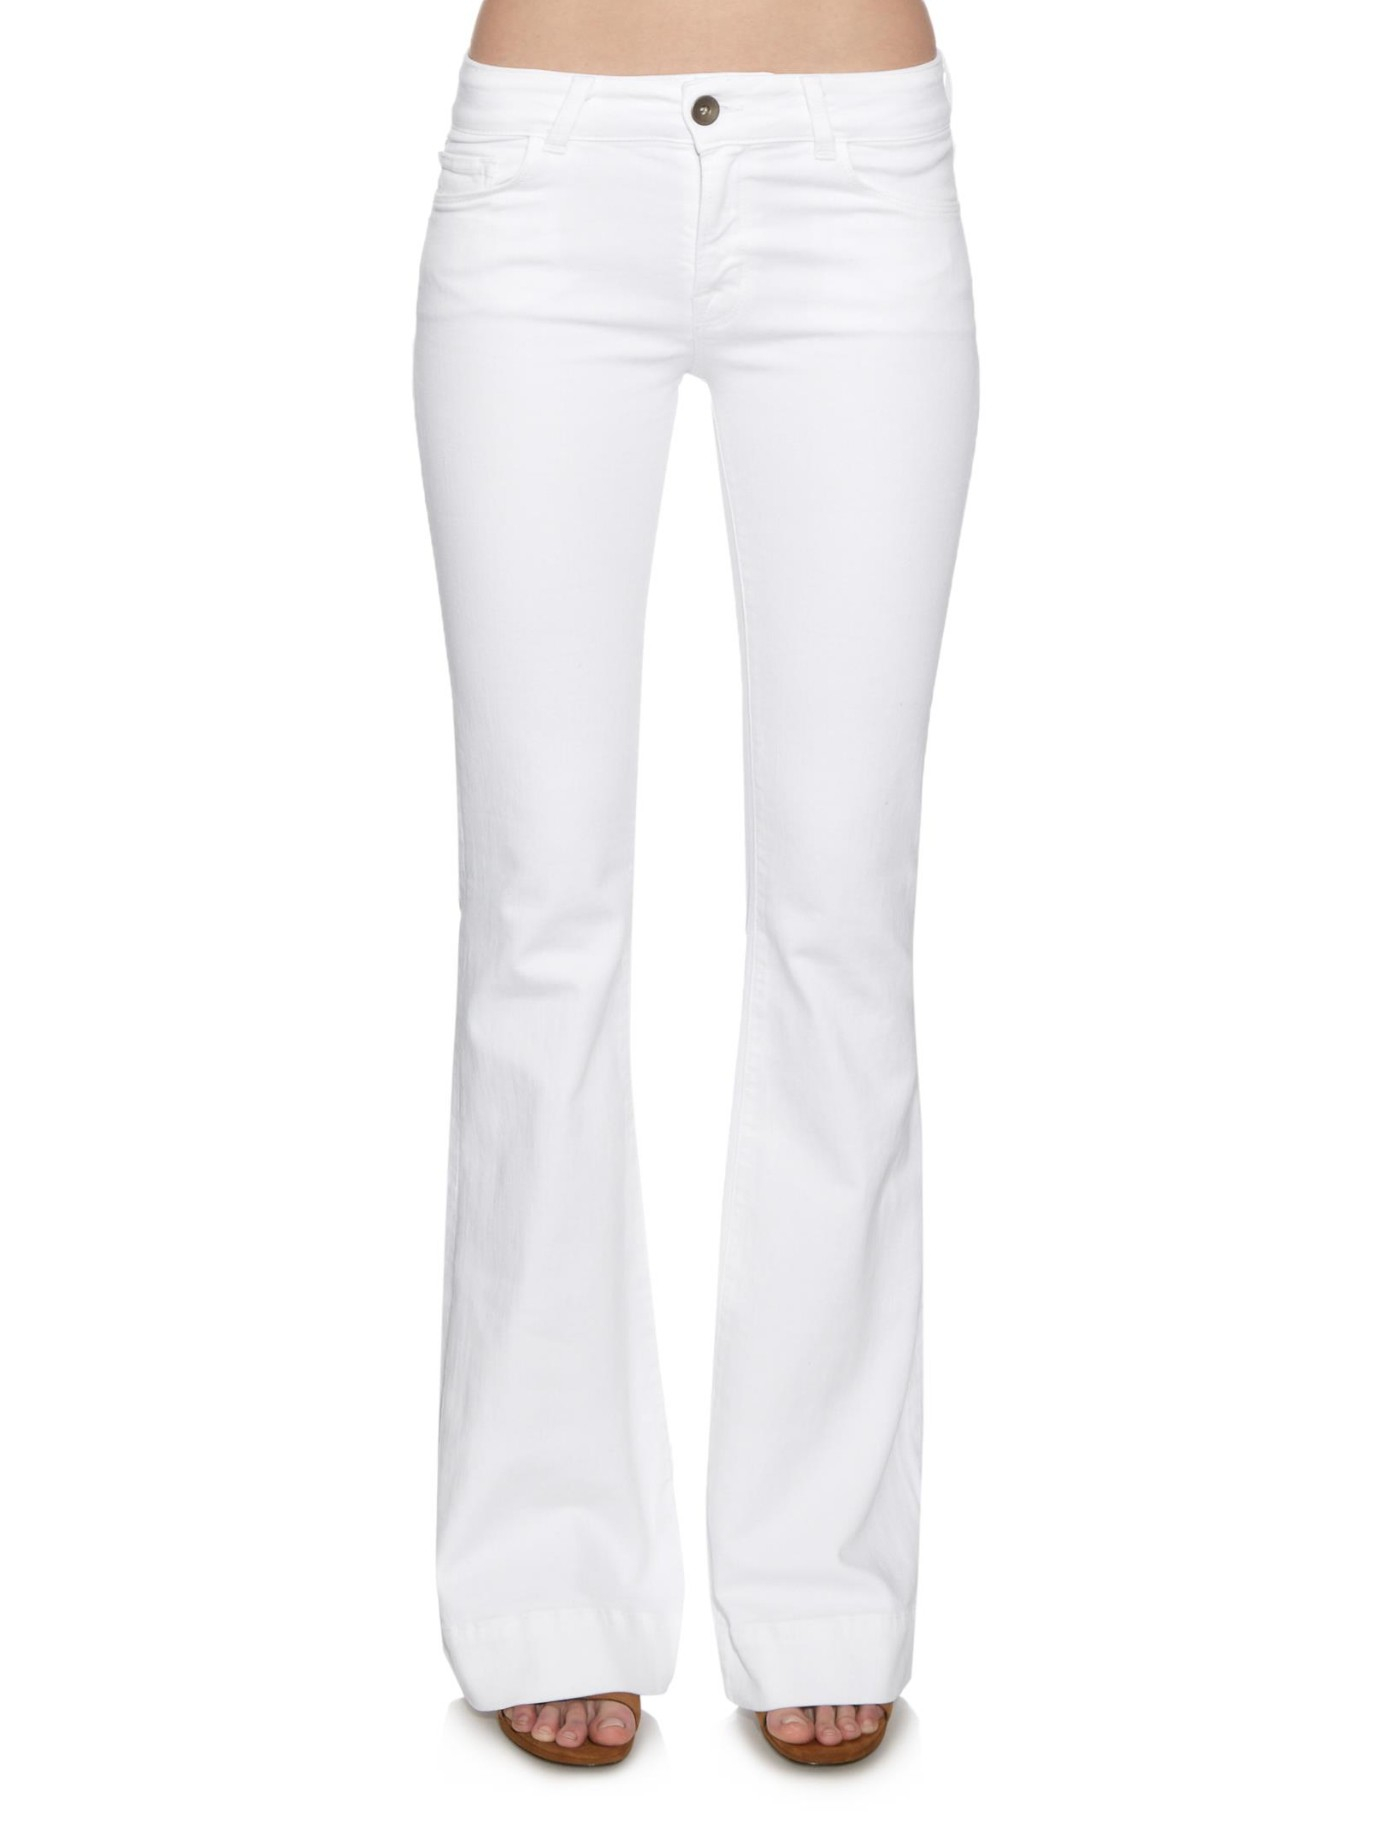 J Brand Love Story Low-rise Flared Jeans in White | Lyst